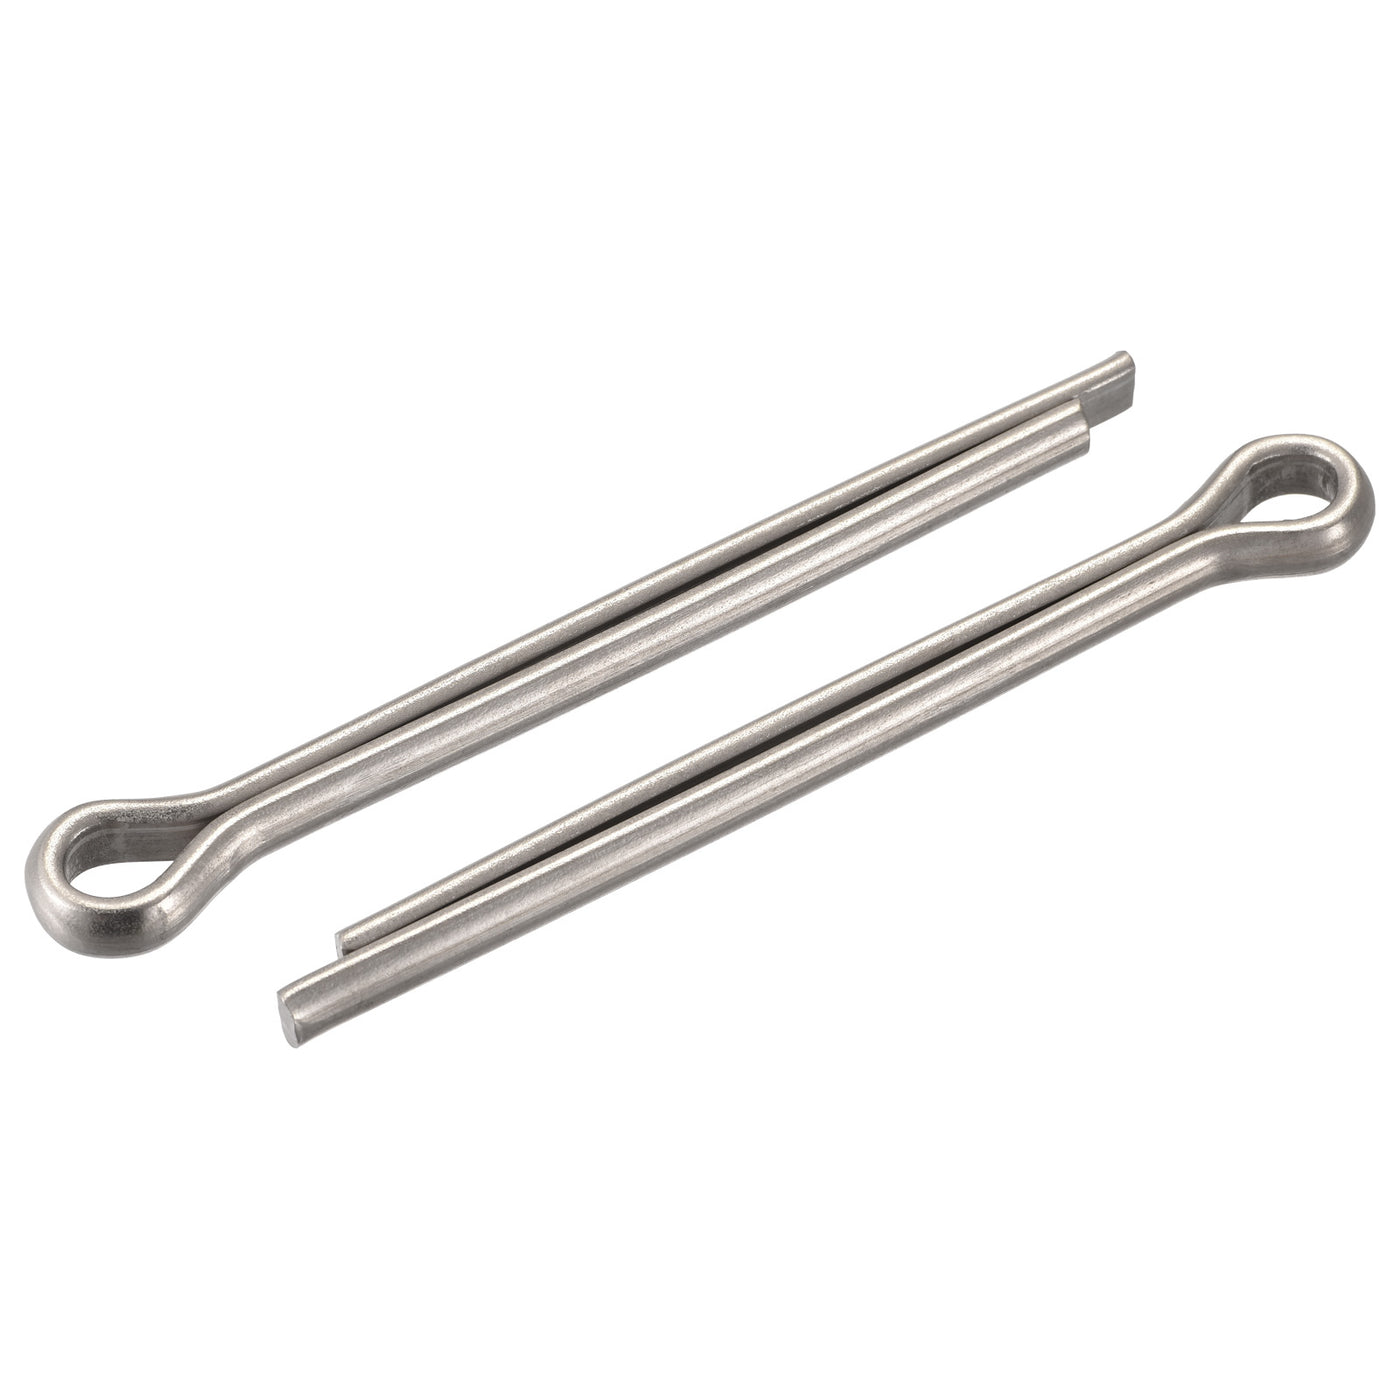 uxcell Uxcell Cotter Pins, 10mm x 110mm 304 Stainless Steel Clip Fastener Fitting for Automotive, Mechanics, Silver Tone, 2Pcs